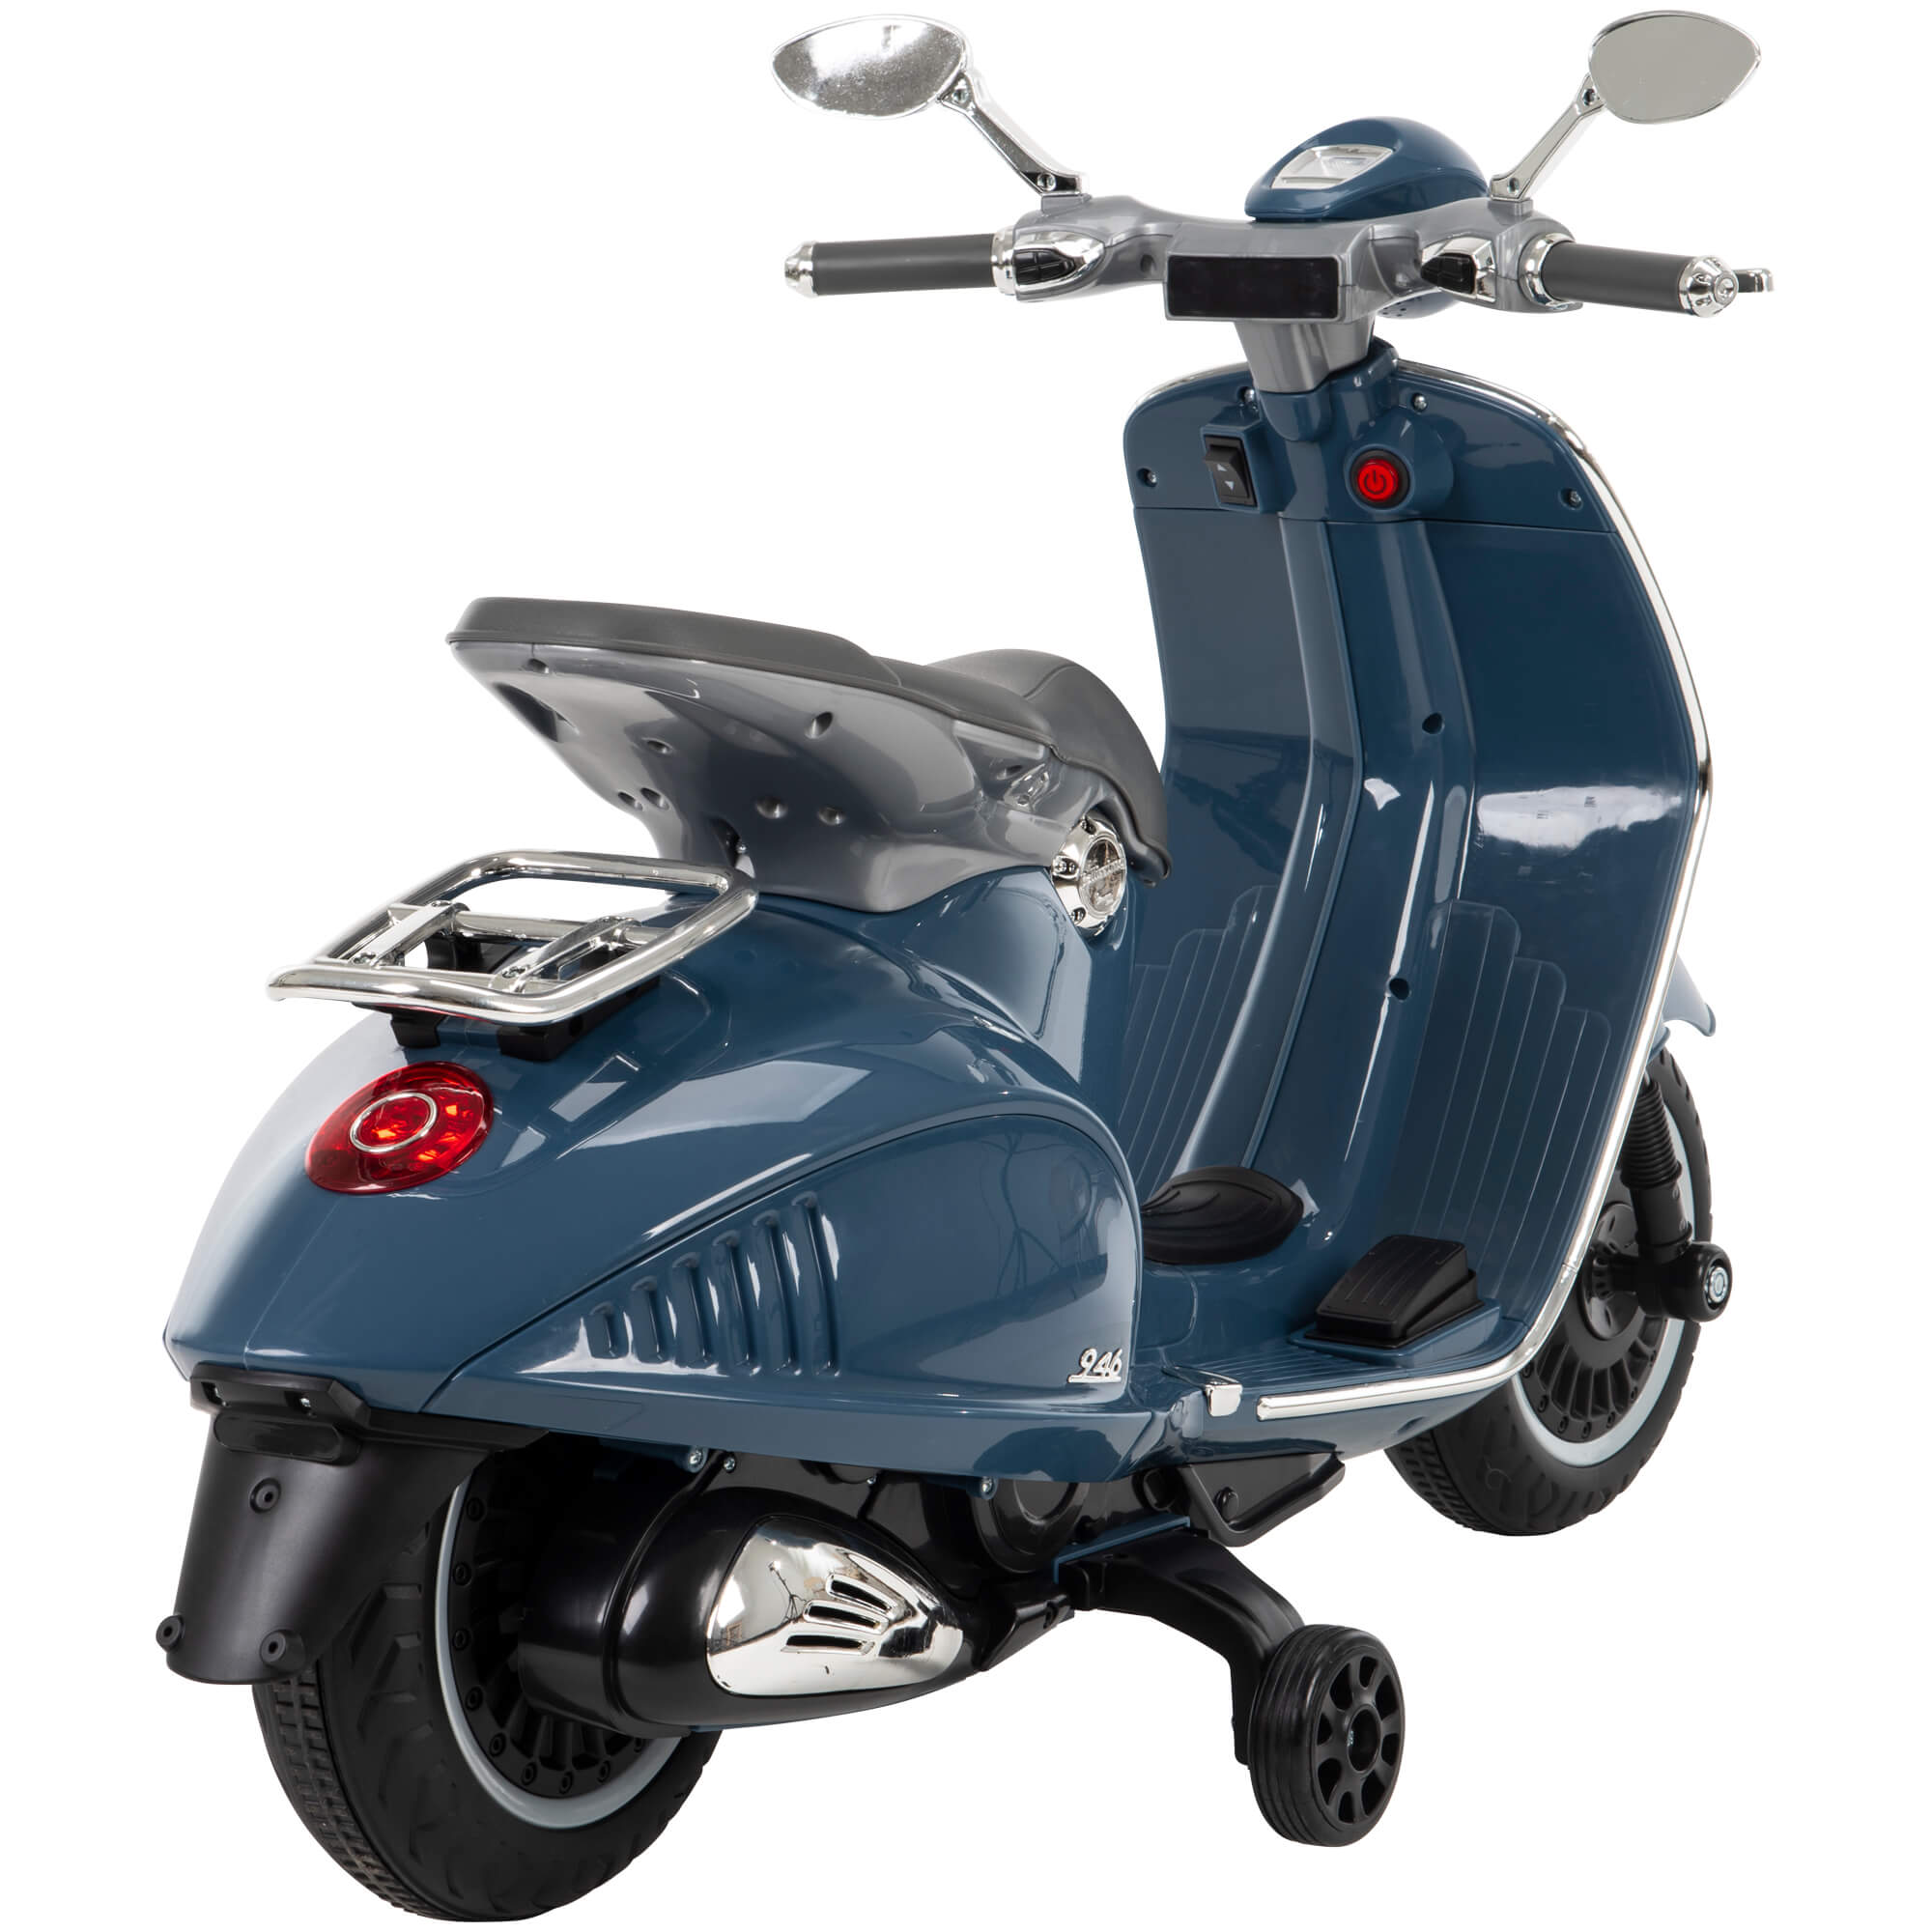 Huffy 6V Vespa Ride-On Electric Scooter for Kids, Blue - image 2 of 7